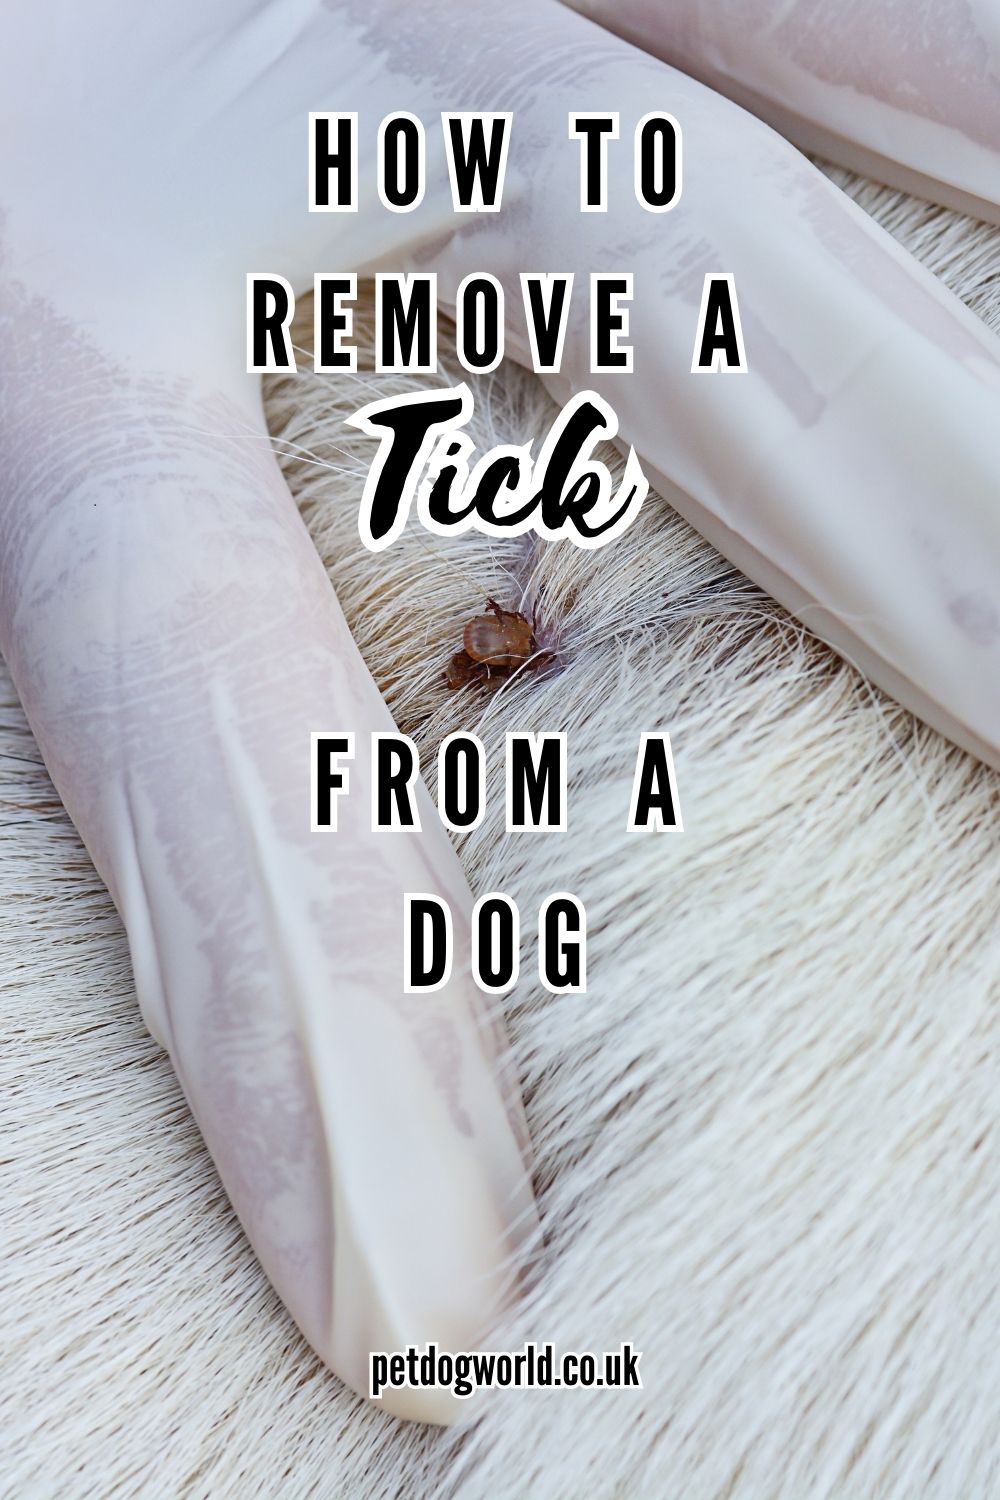 Learn how to safely remove a tick from your dog, ensuring their health & wellbeing. Get advice on tools, techniques & preventative measures